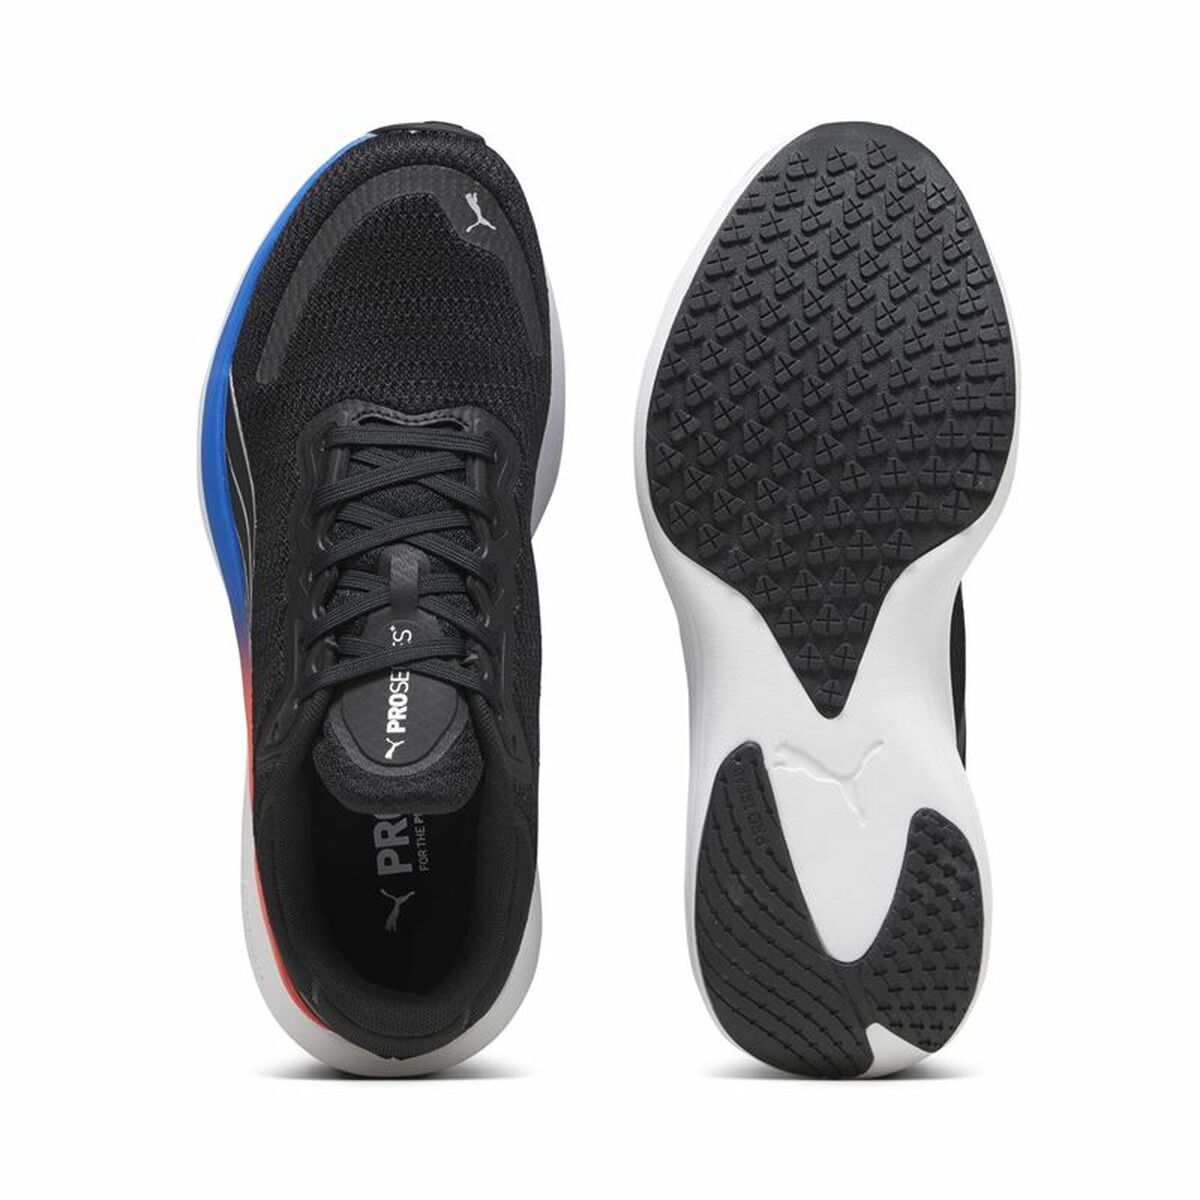 Running Shoes for Adults Puma Scend Pro Black Men